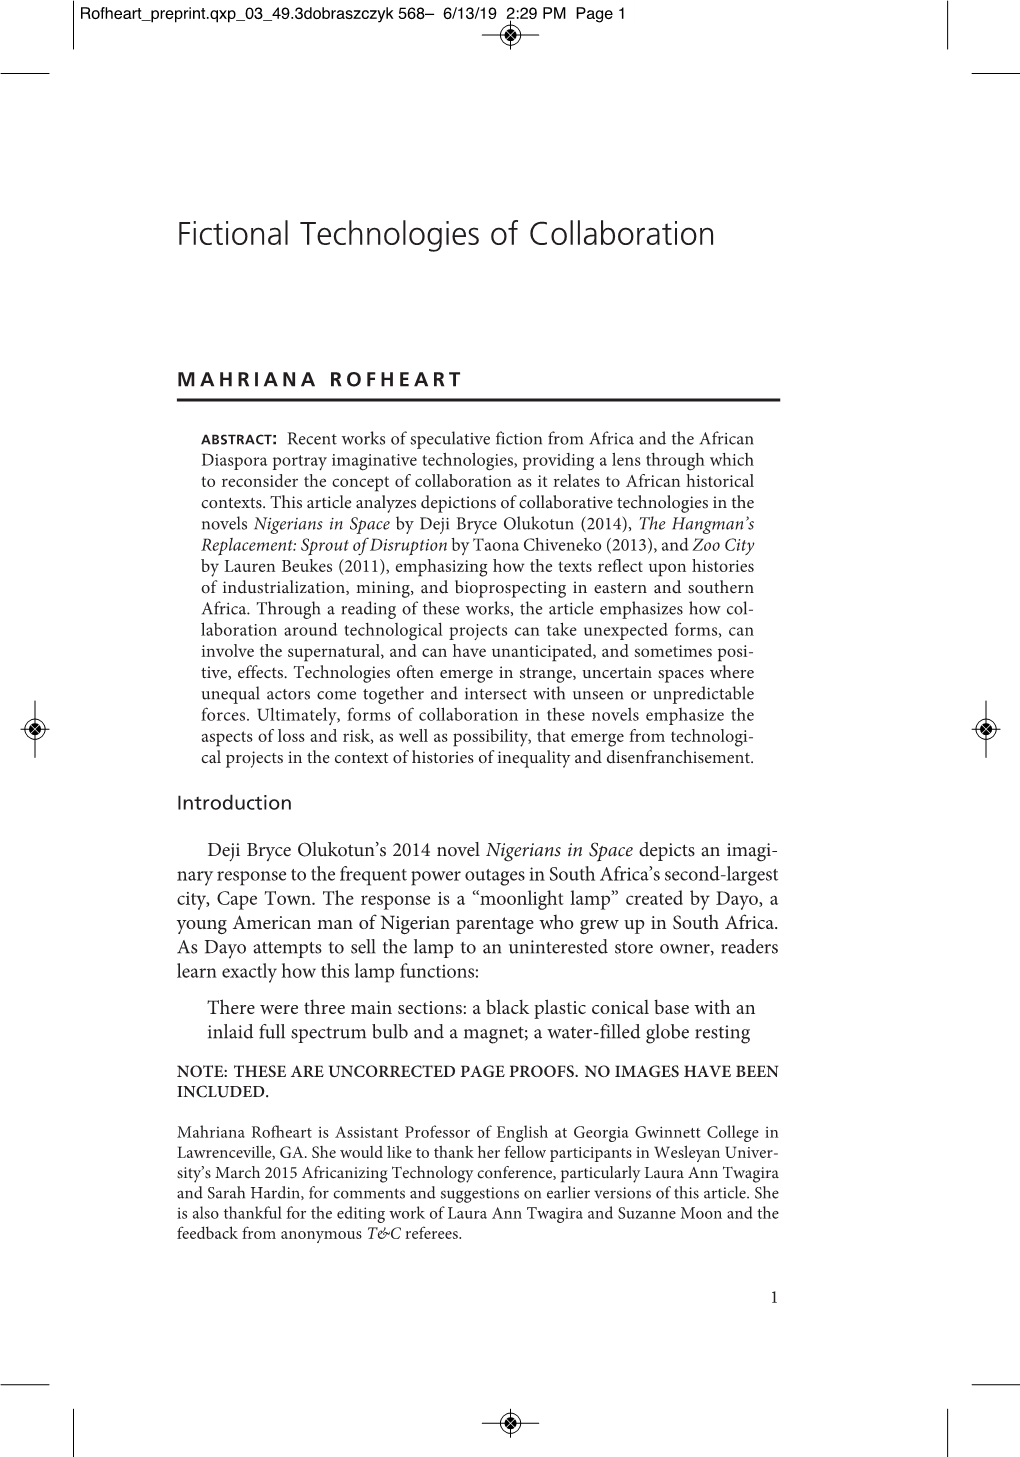 Fictional Technologies of Collaboration